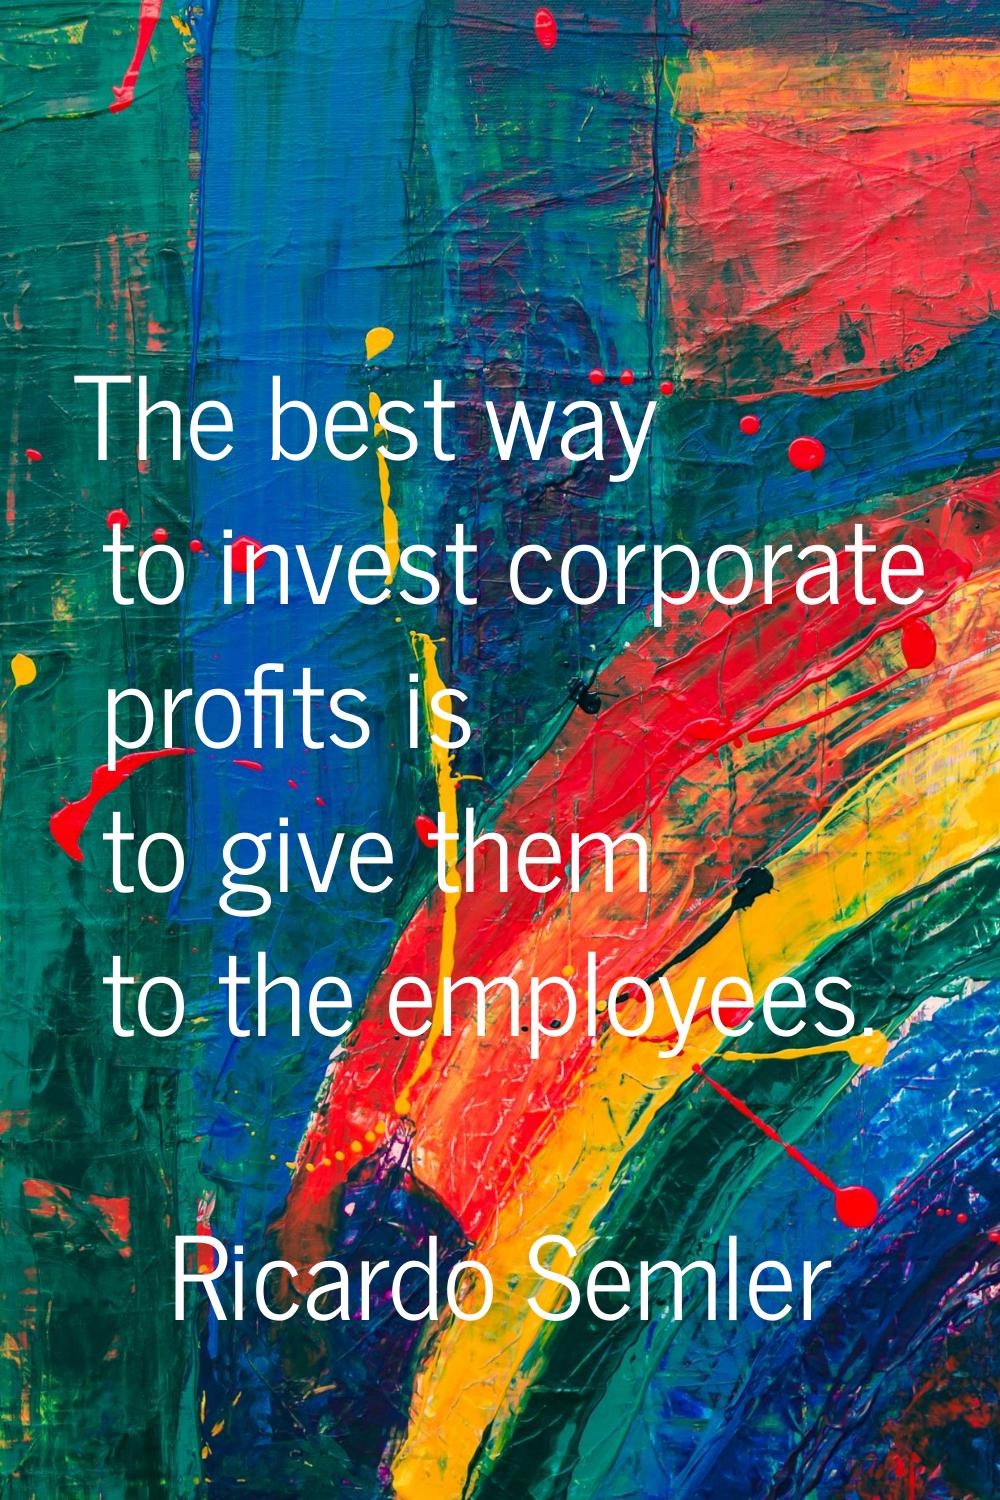 The best way to invest corporate profits is to give them to the employees.